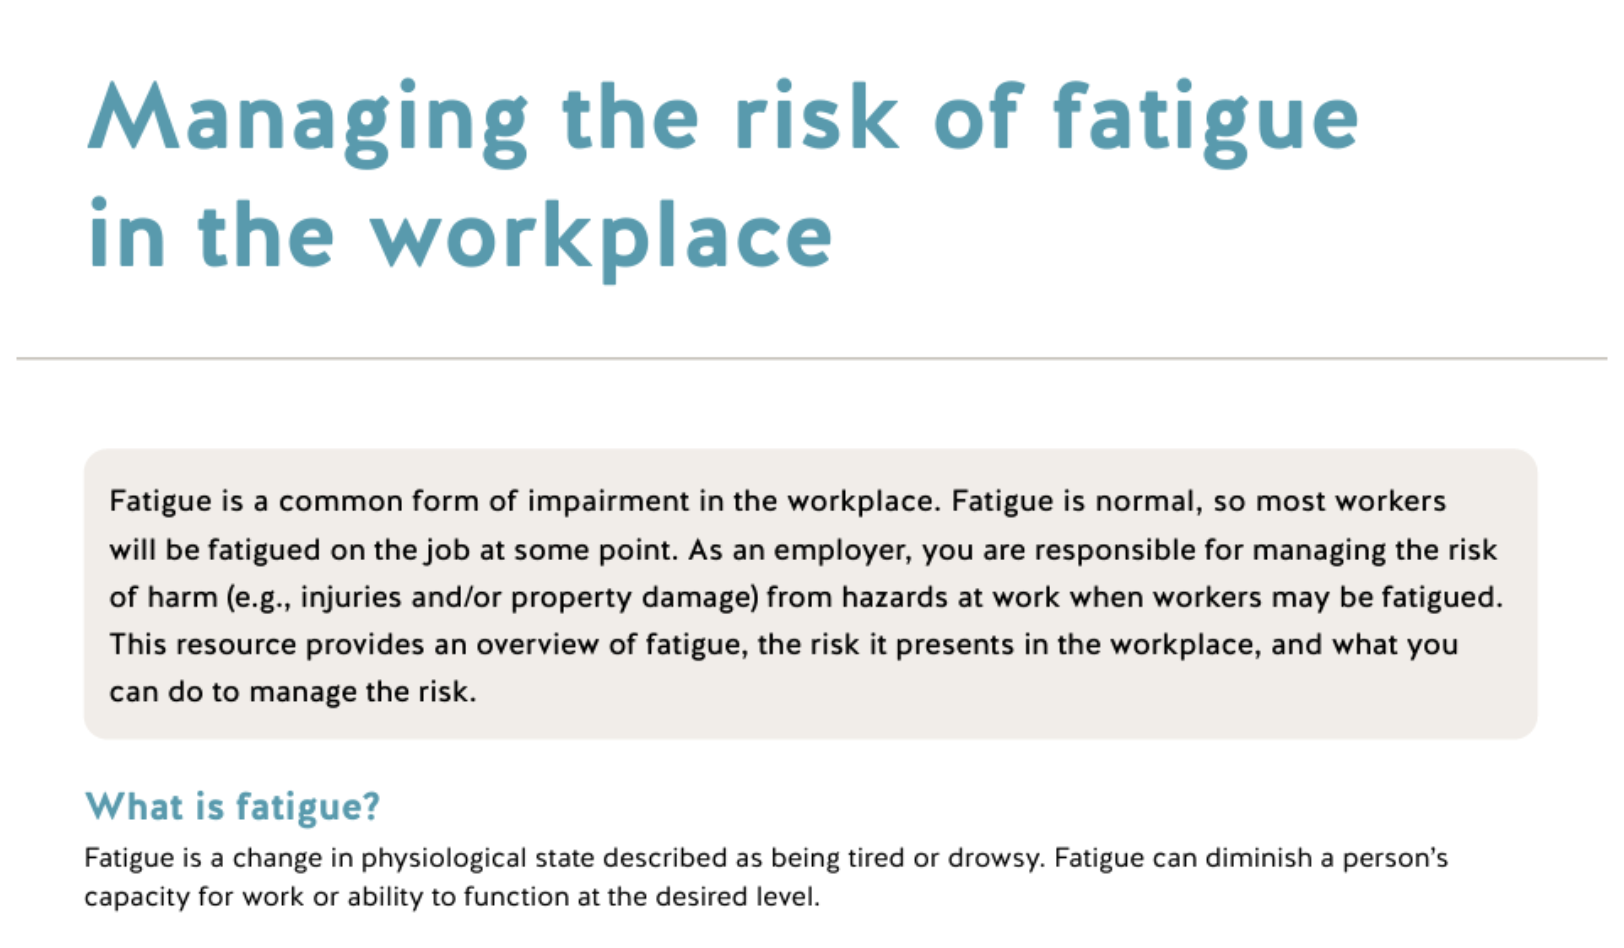 Managing the risk of fatigue in the workplace